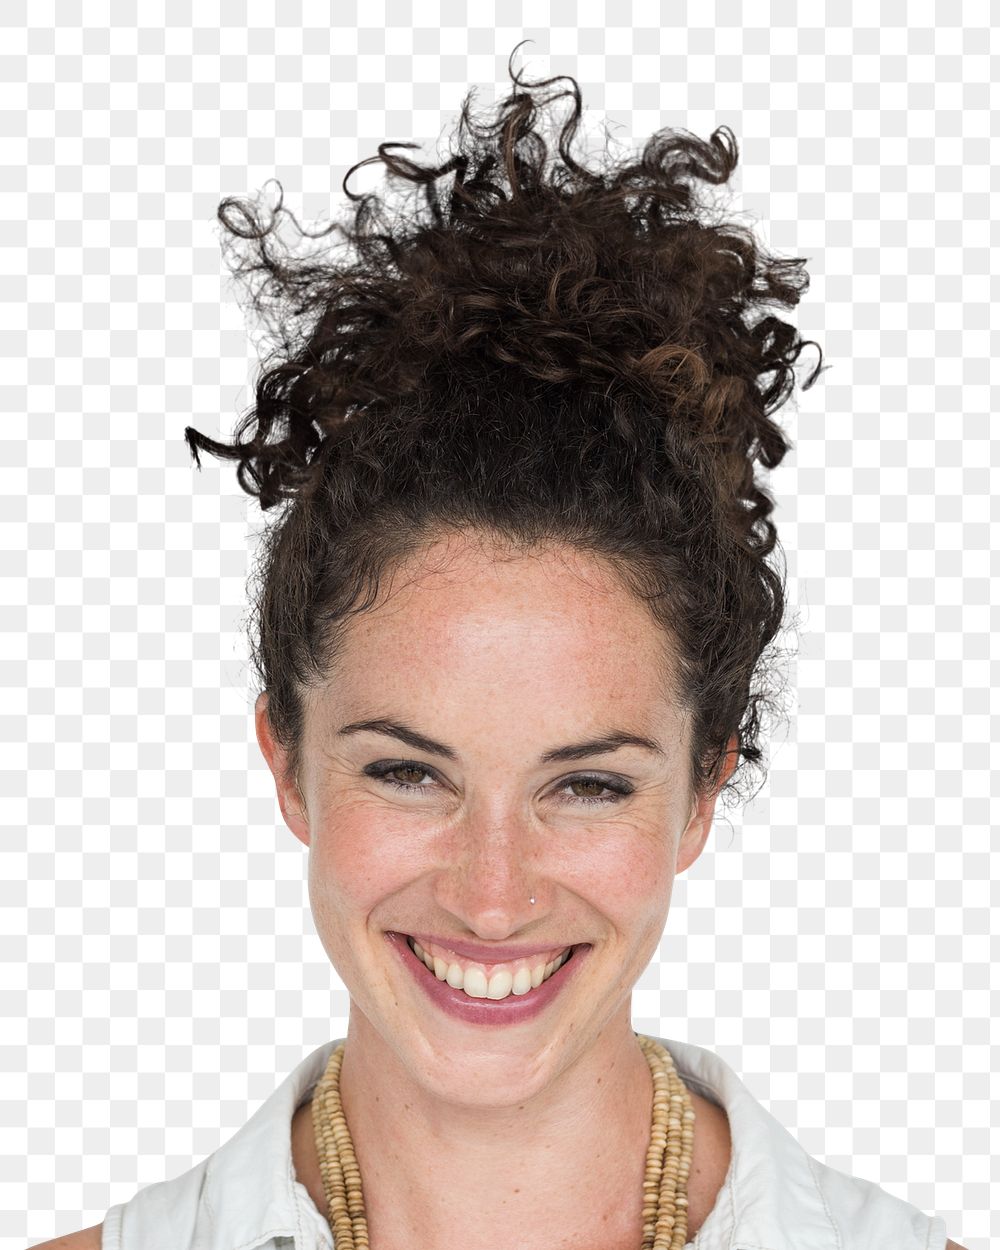 Curly haired woman png transparent, smiling face portrait